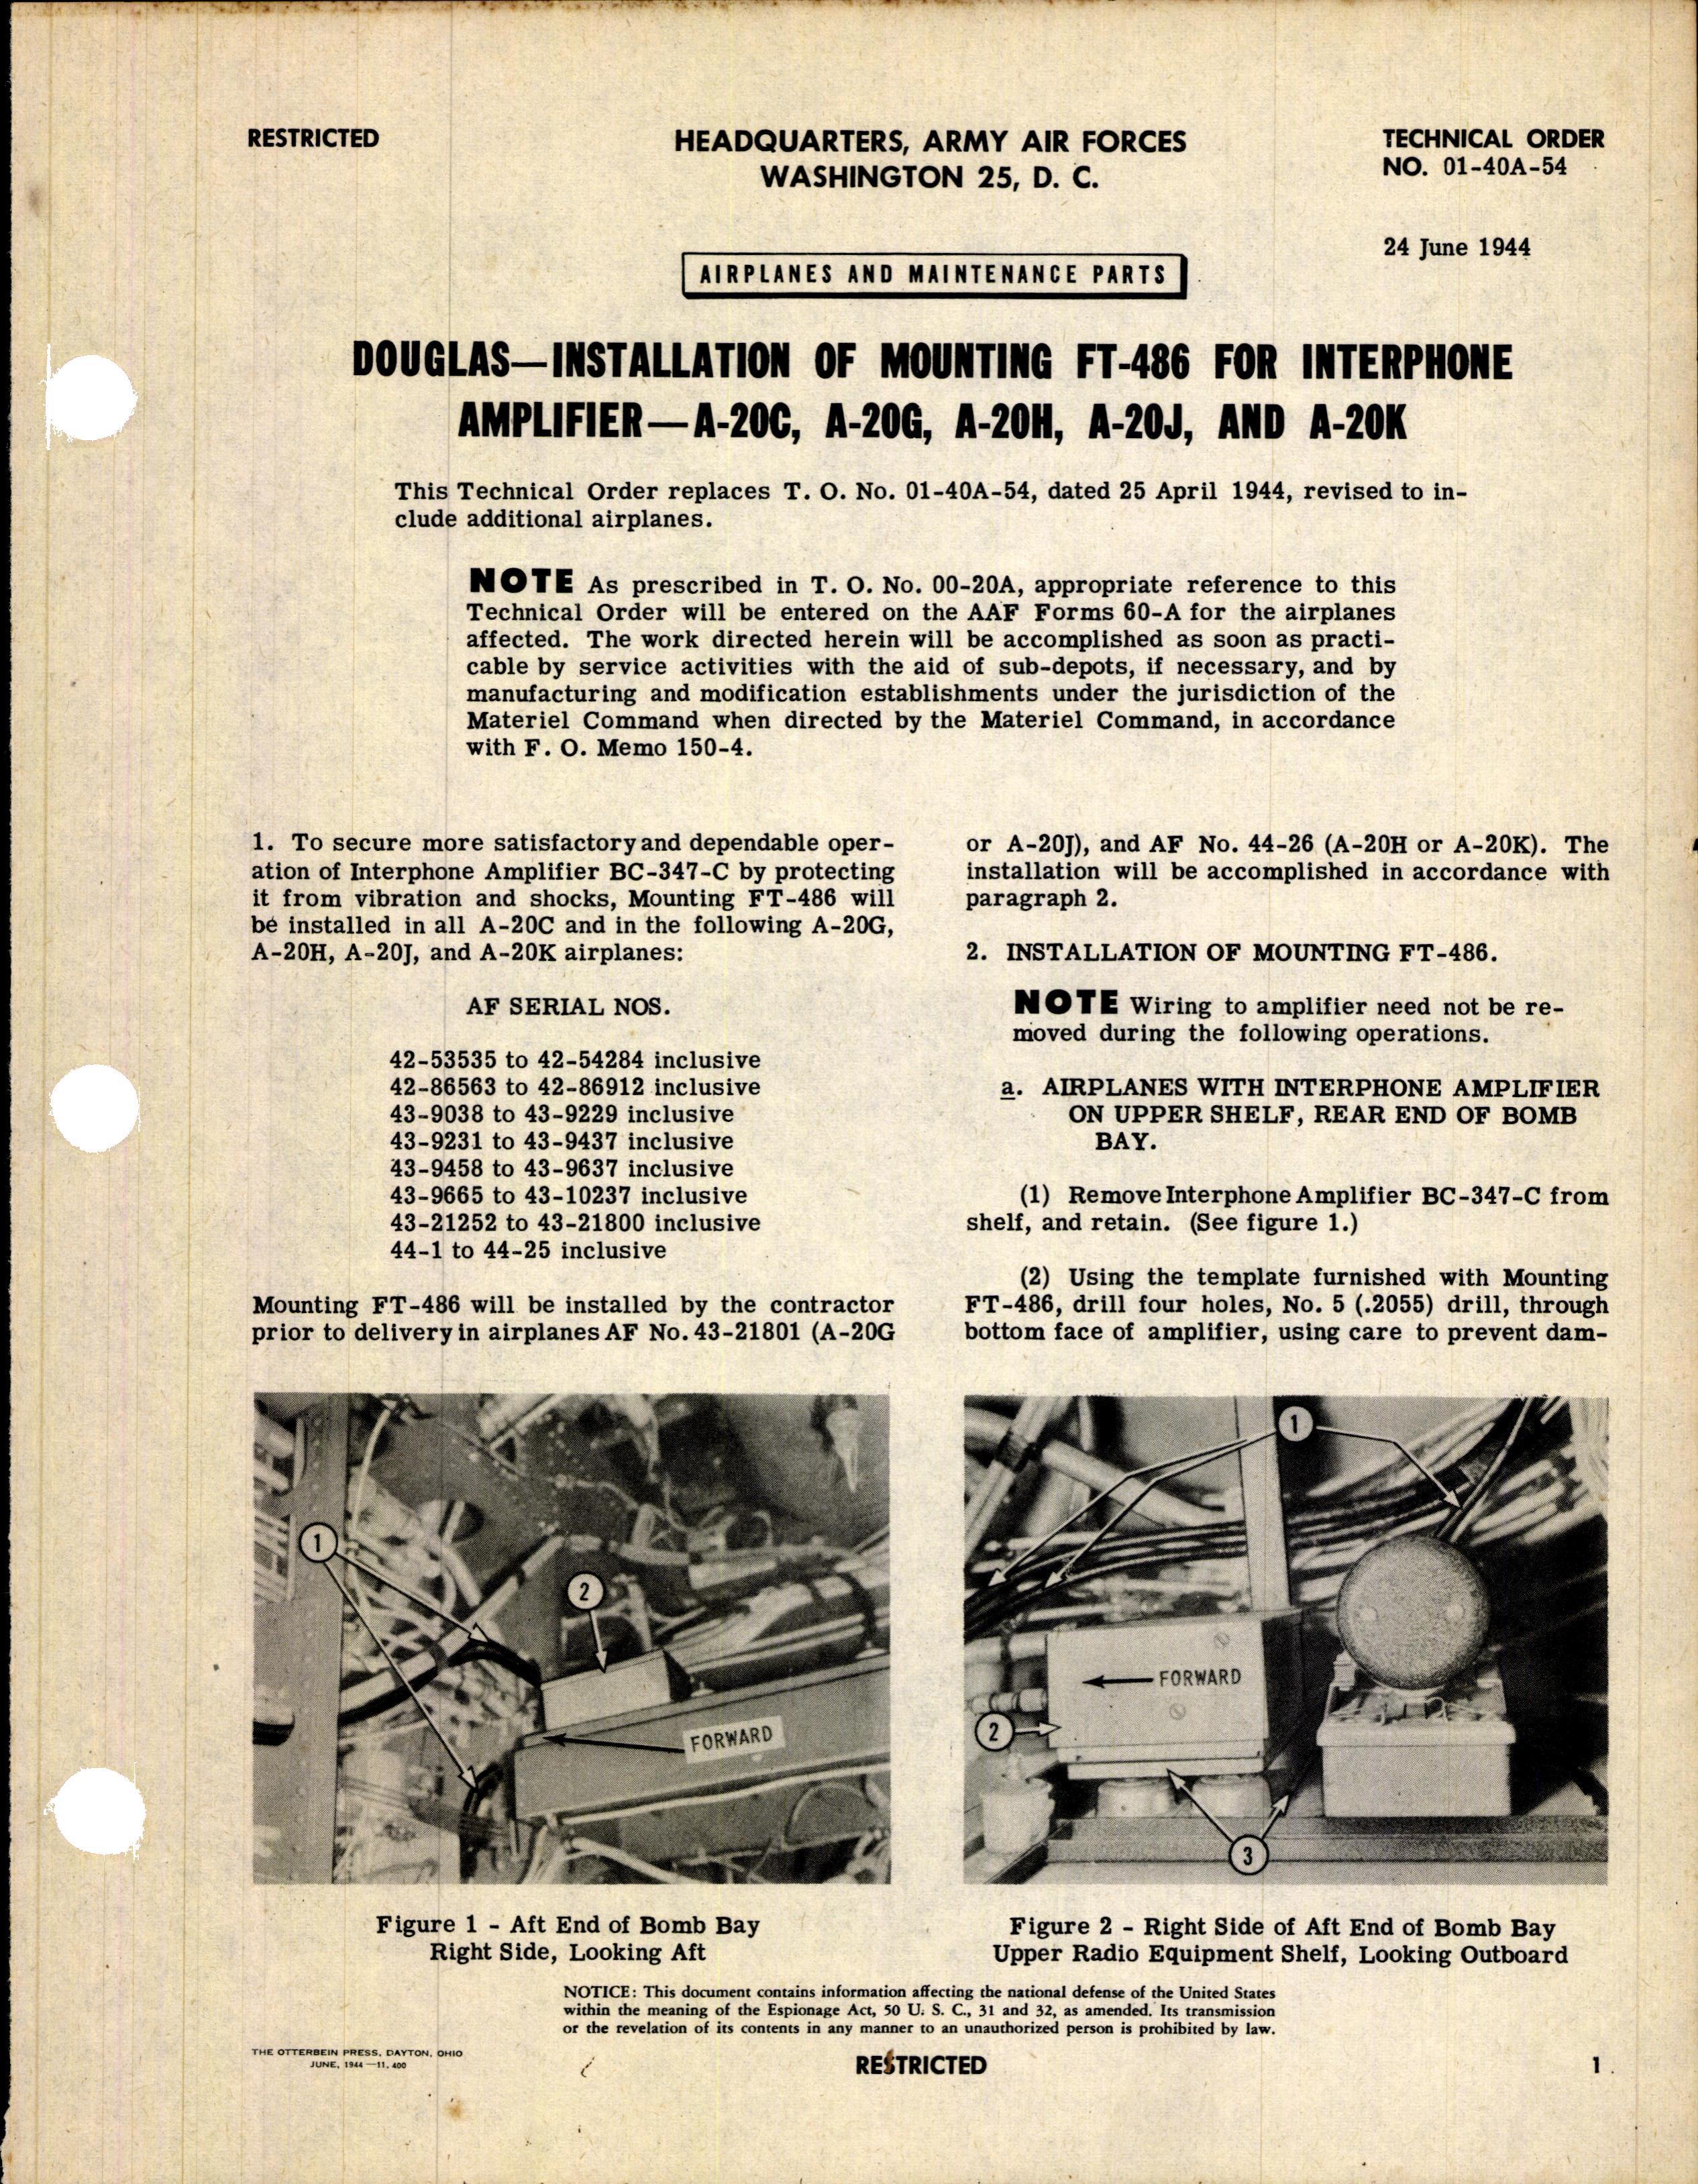 Sample page 1 from AirCorps Library document: Installation of Mounting FT-486 for Interphone Amplifier